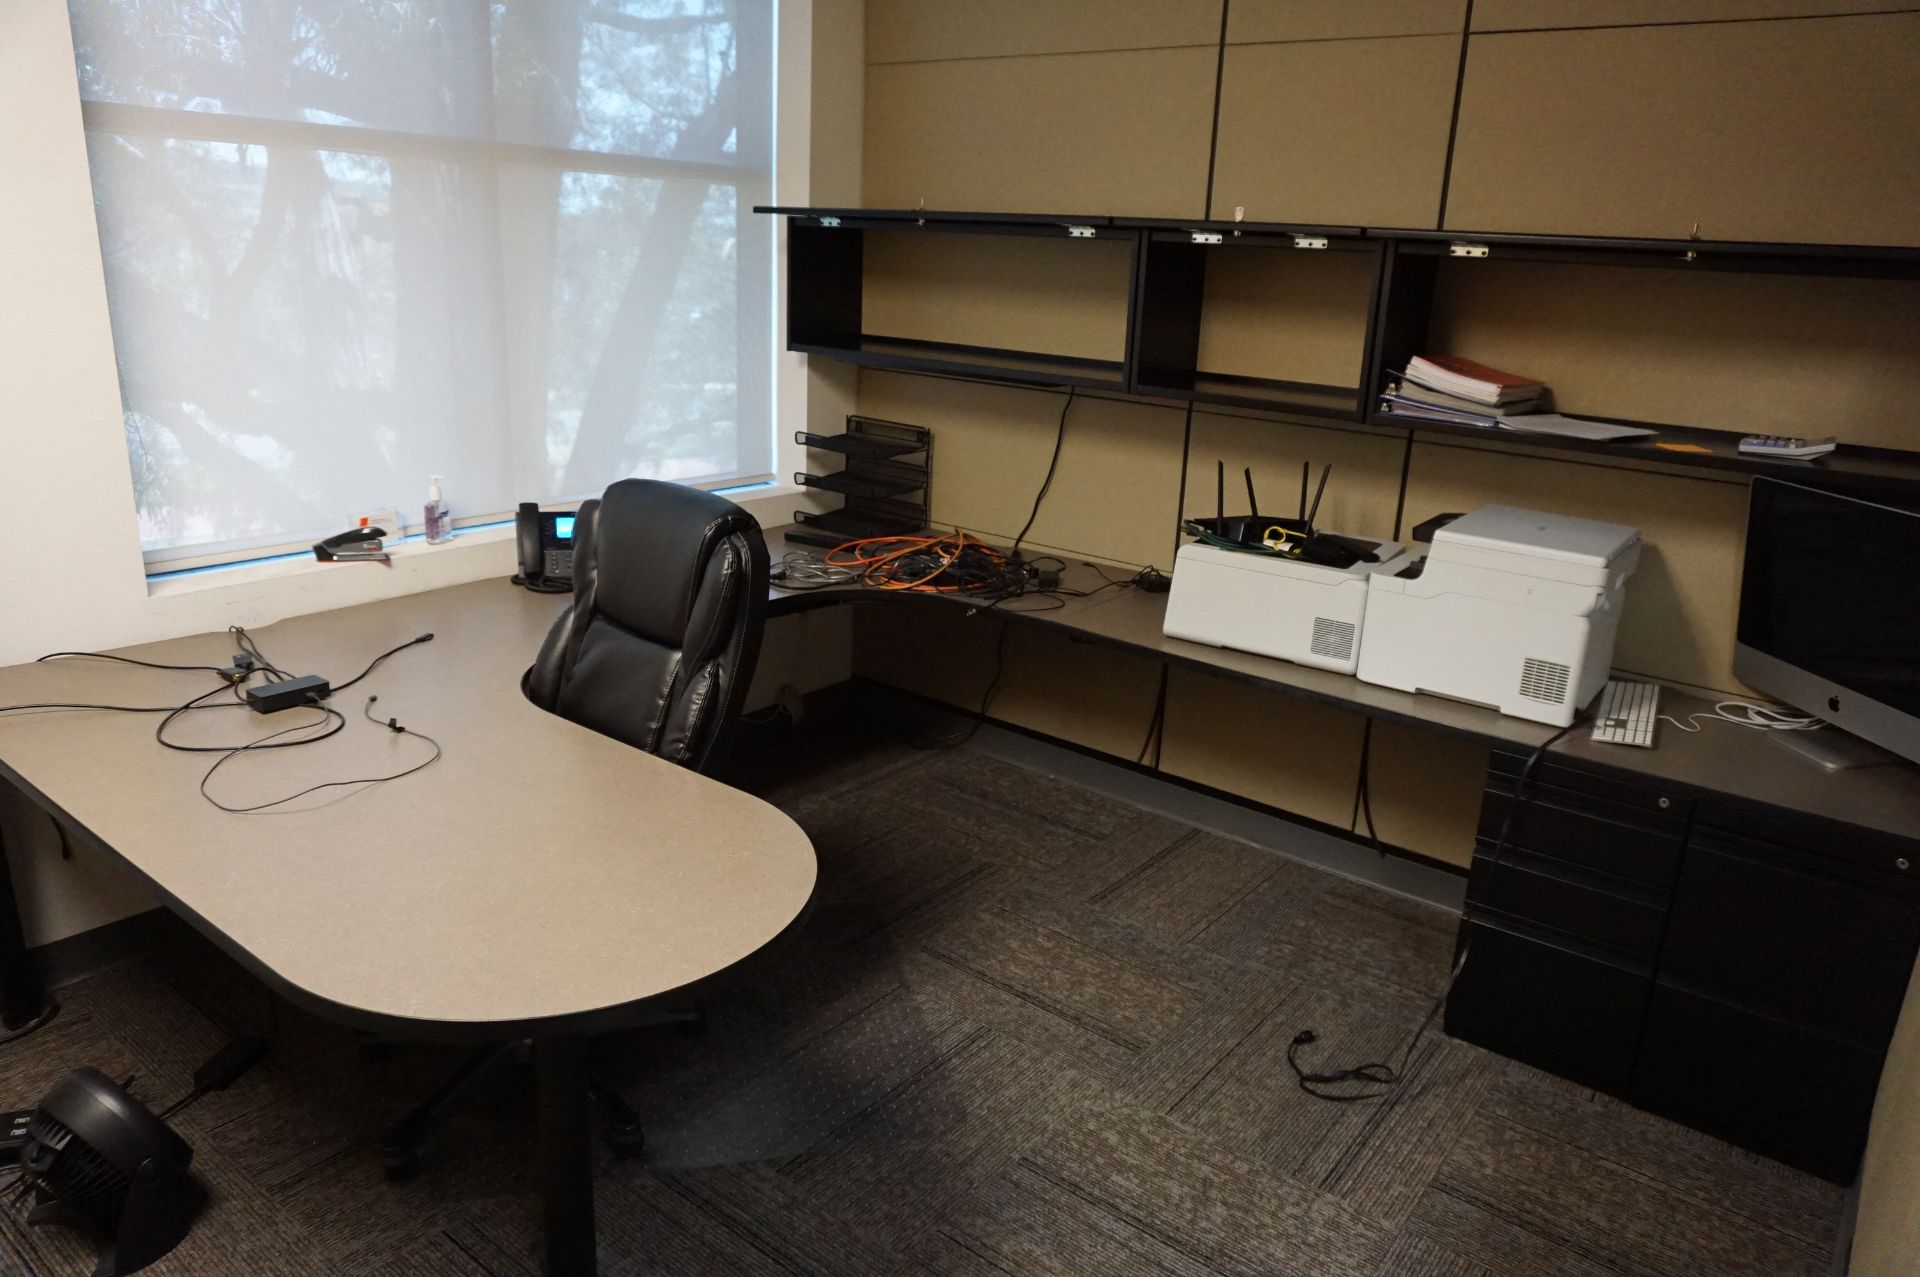 SECOND FLOOR OFFICE TO INCLUDE: WRAPAROUND OFFICE DESK WITH ATTACHED FILE CABINETS, OFFICE CHAIRS * - Image 2 of 6